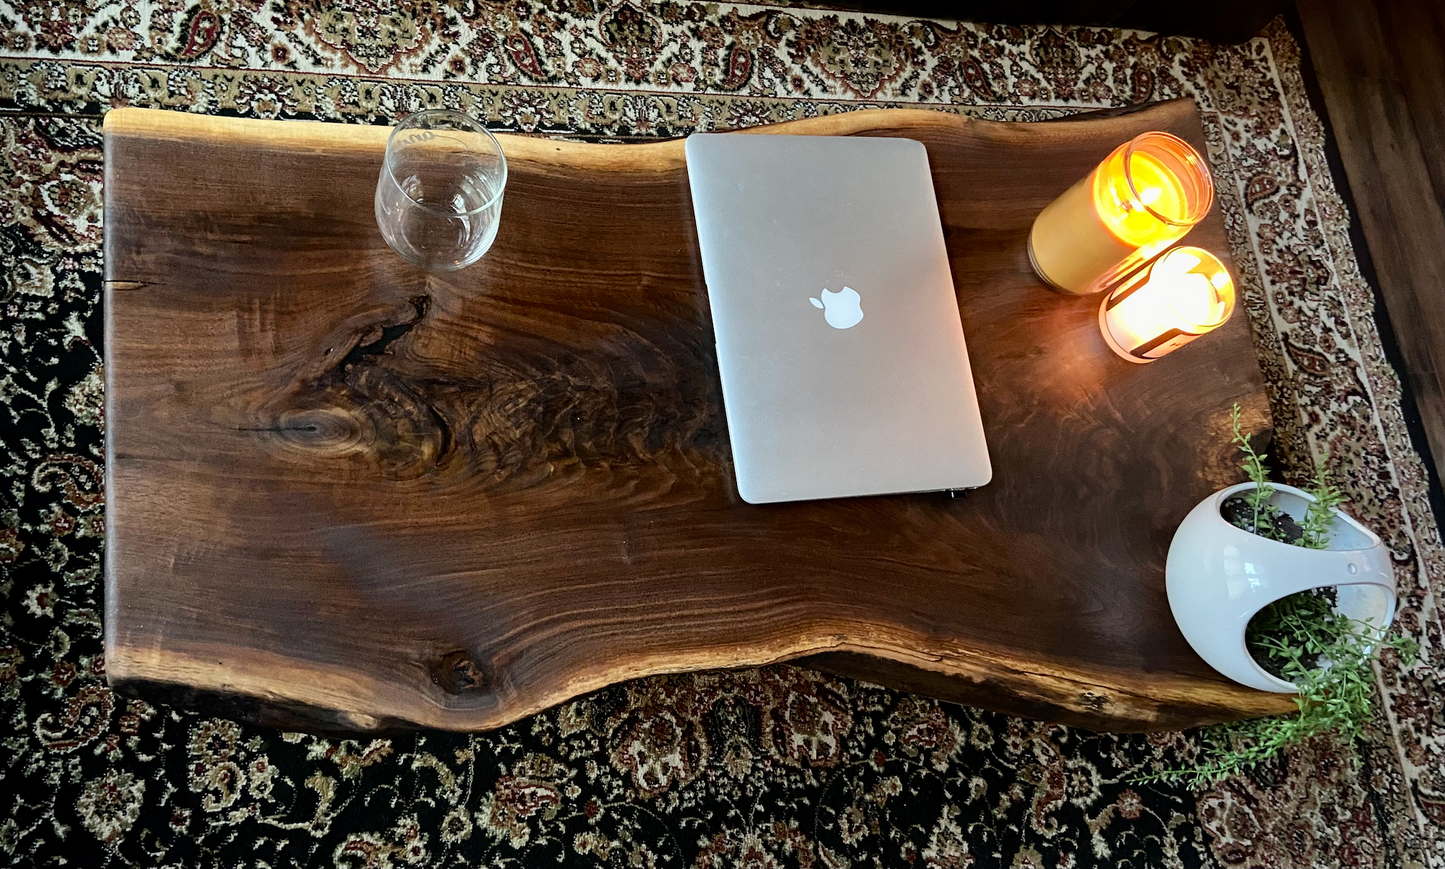 Naturally Forked Live Edge Walnut Coffee Table, Rustic Natural Edge Black Walnut Wood, Live Edge Console Table, Unique Live Edge Wood Table